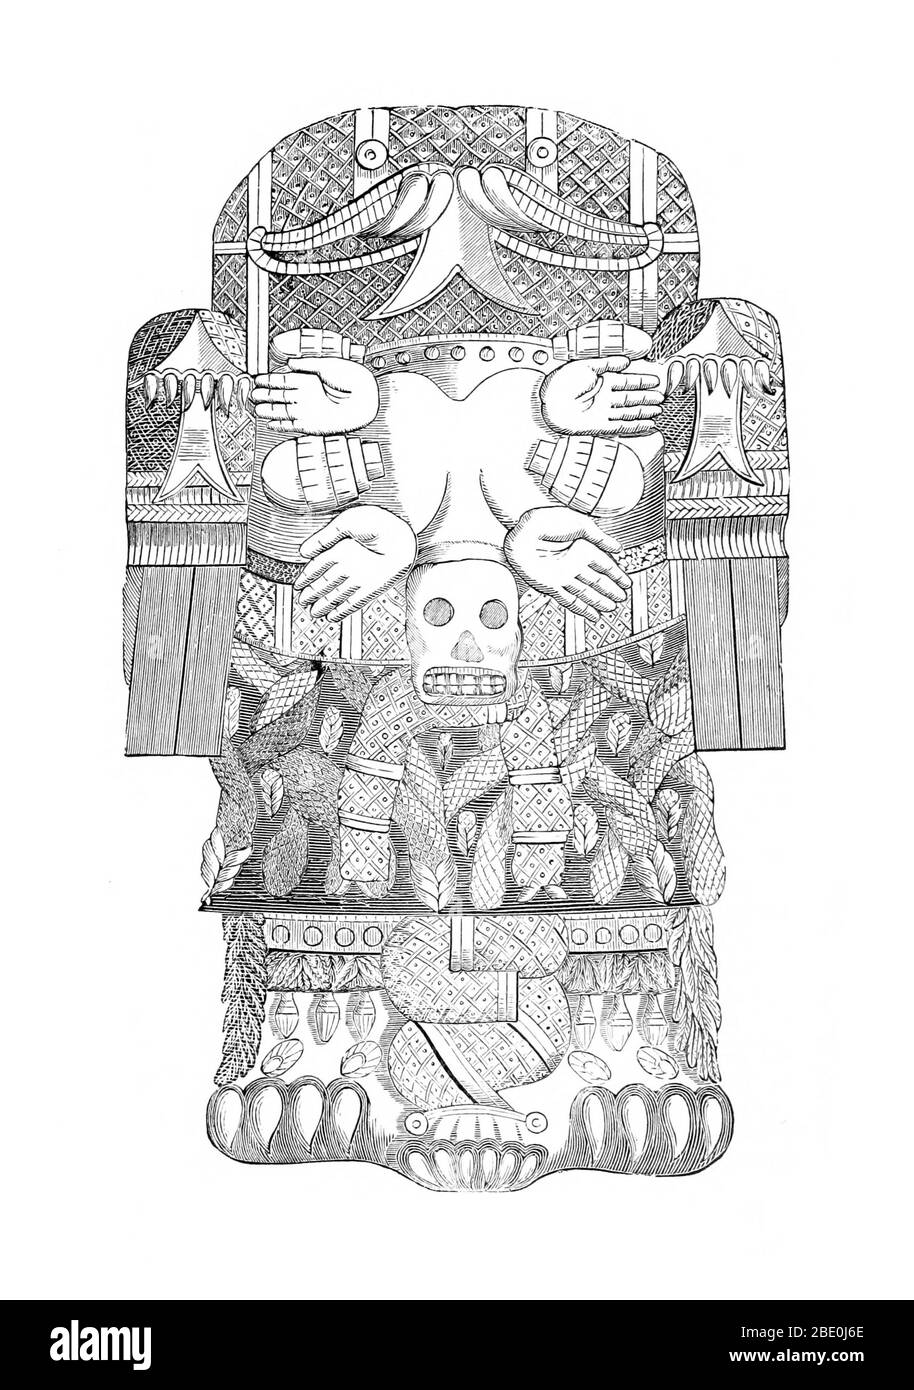 In Aztec mythology, Cihuacoatl was one of a number of motherhood and fertility goddesses. Cihuacoatl was especially associated with midwives, and with the sweatbaths where midwives practiced. She is paired with Quilaztli and was considered a protectress of the Chalmeca people and patroness of the city of Culhuacan. She helped Quetzalcoatl create the current race of humanity by grinding up bones from the previous ages, and mixing it with his blood. She is often shown as a fierce skull-faced old woman carrying the spears and shield of a warrior. Childbirth was sometimes compared to warfare and t Stock Photo